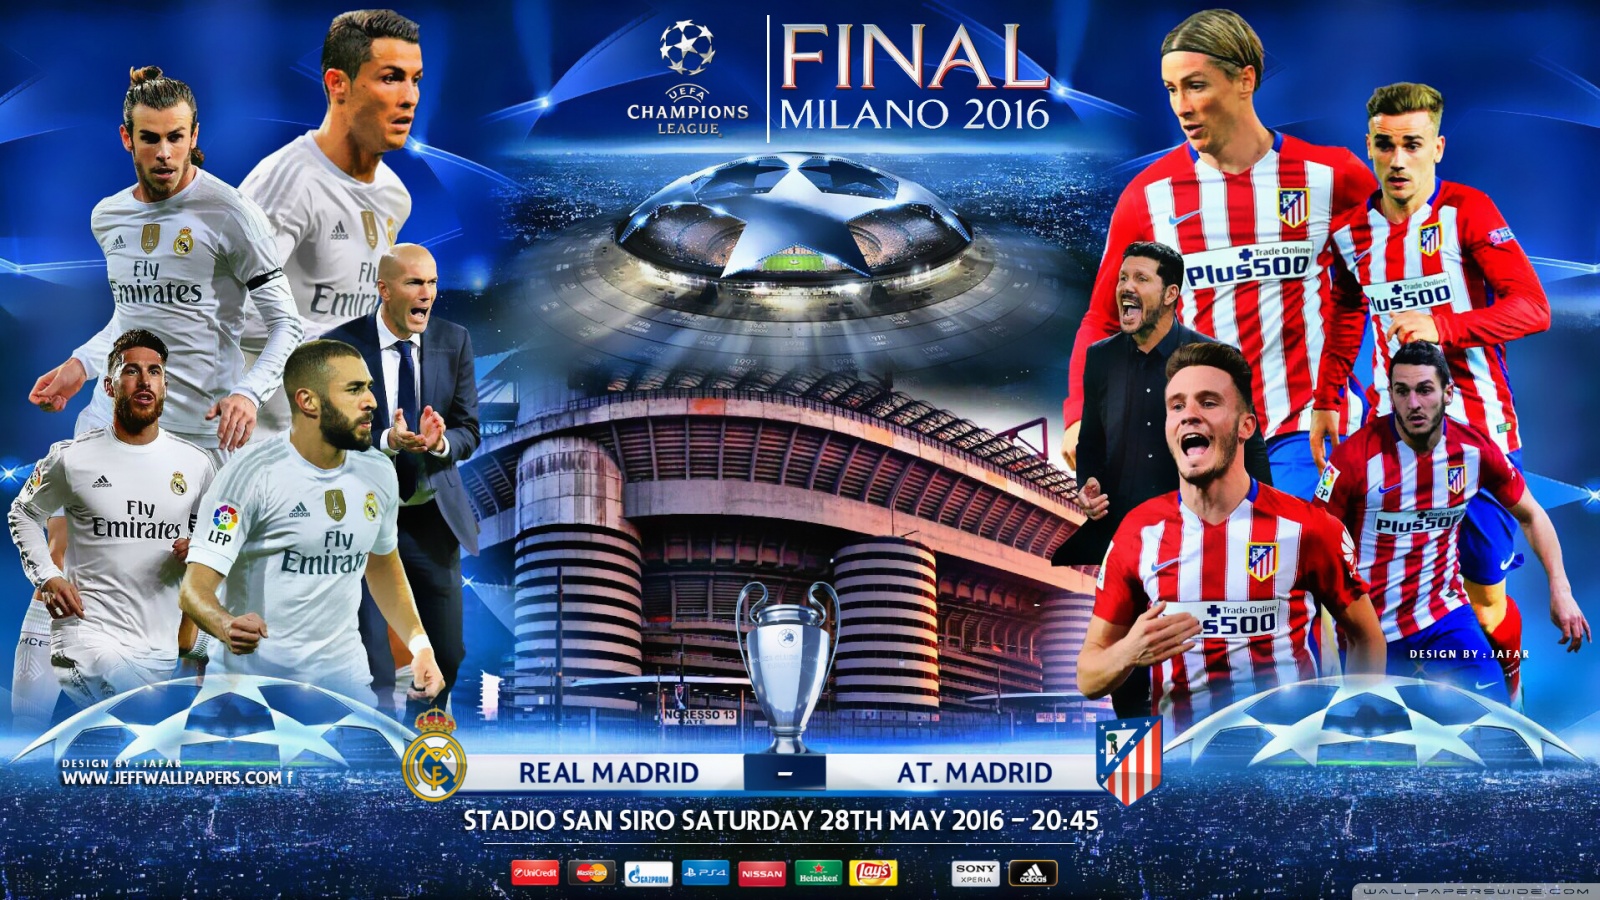 REAL MADRID ATLETICO MADRID CHAMPIONS LEAGUE FINAL 2016 HD